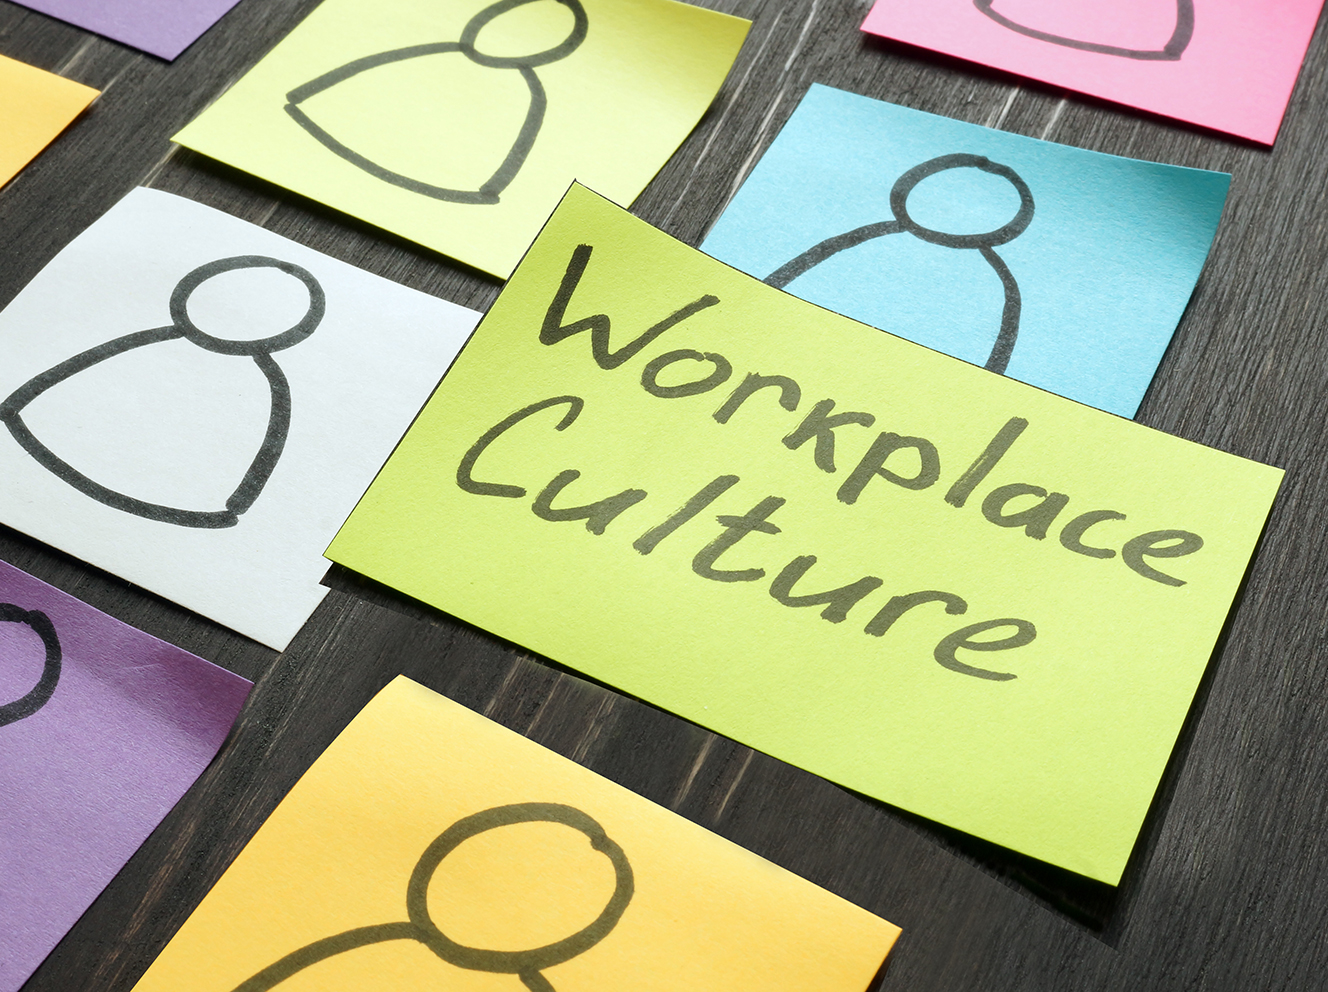 Improving Workplace Culture for Women in Orthopedics